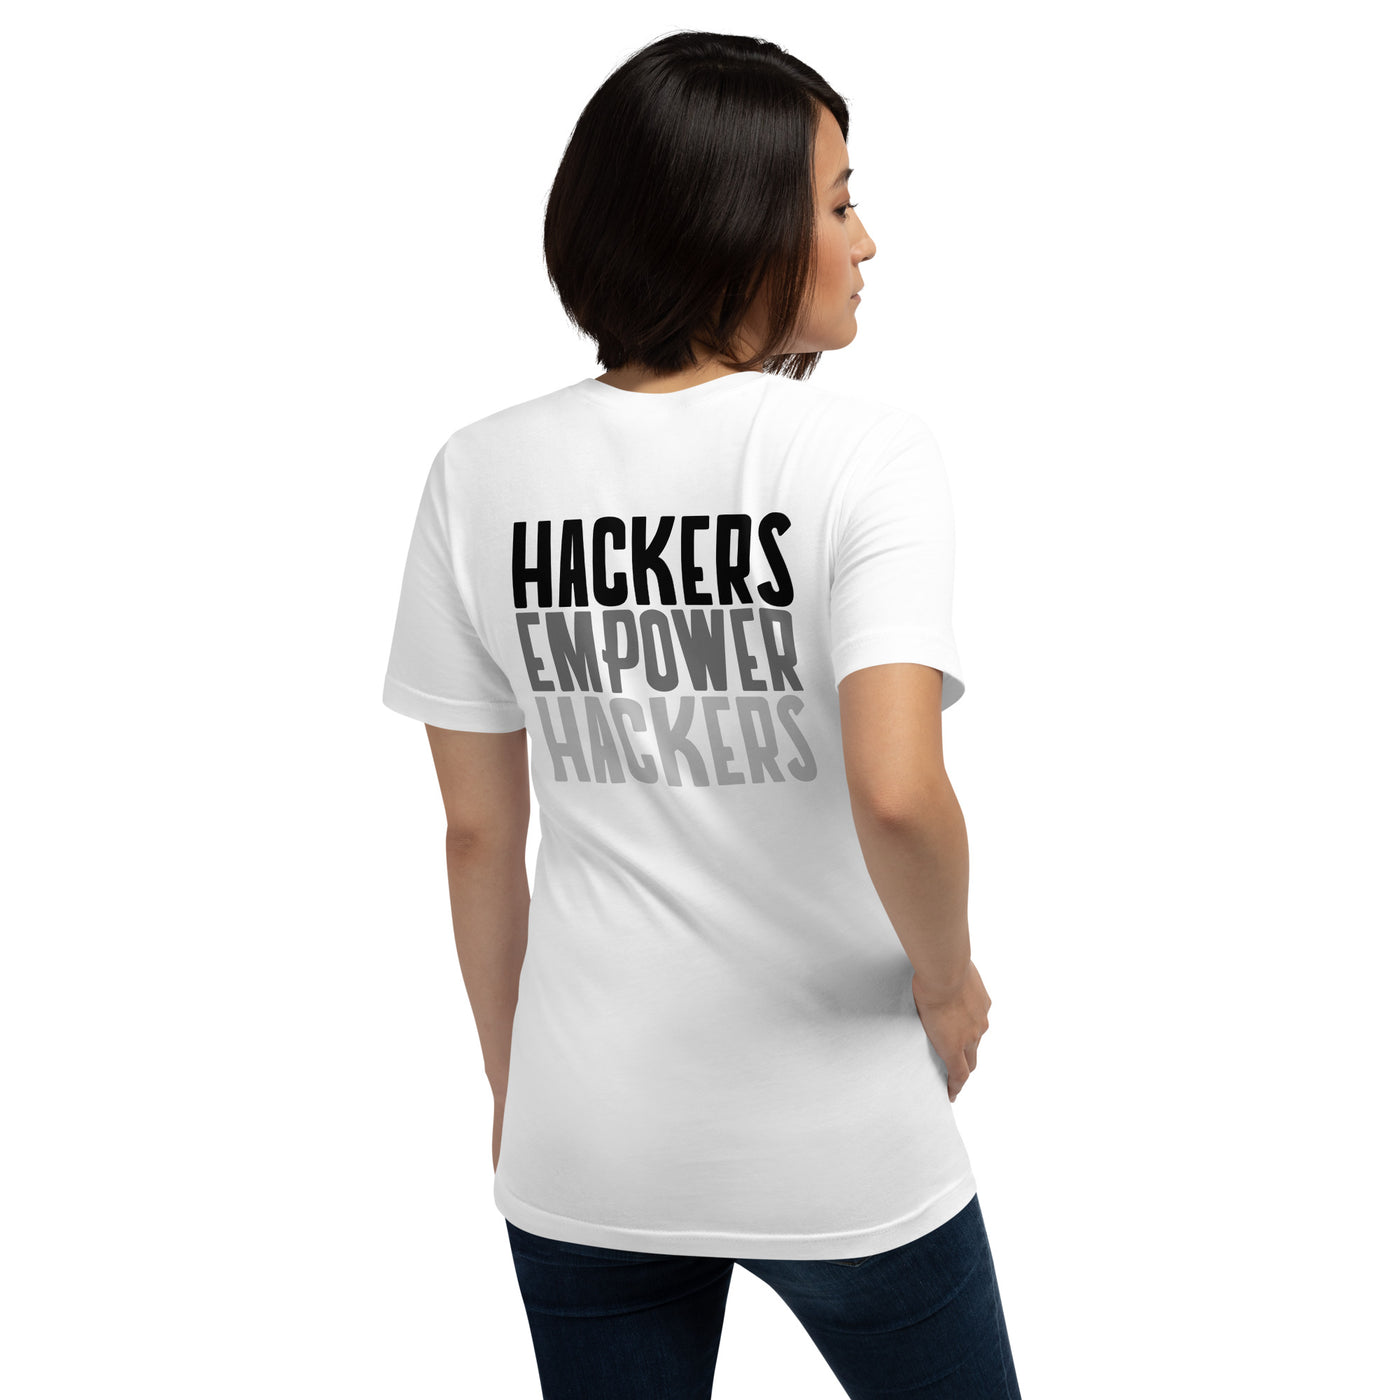 Hackers Empower Hackers - Unisex t-shirt ( Back Print )